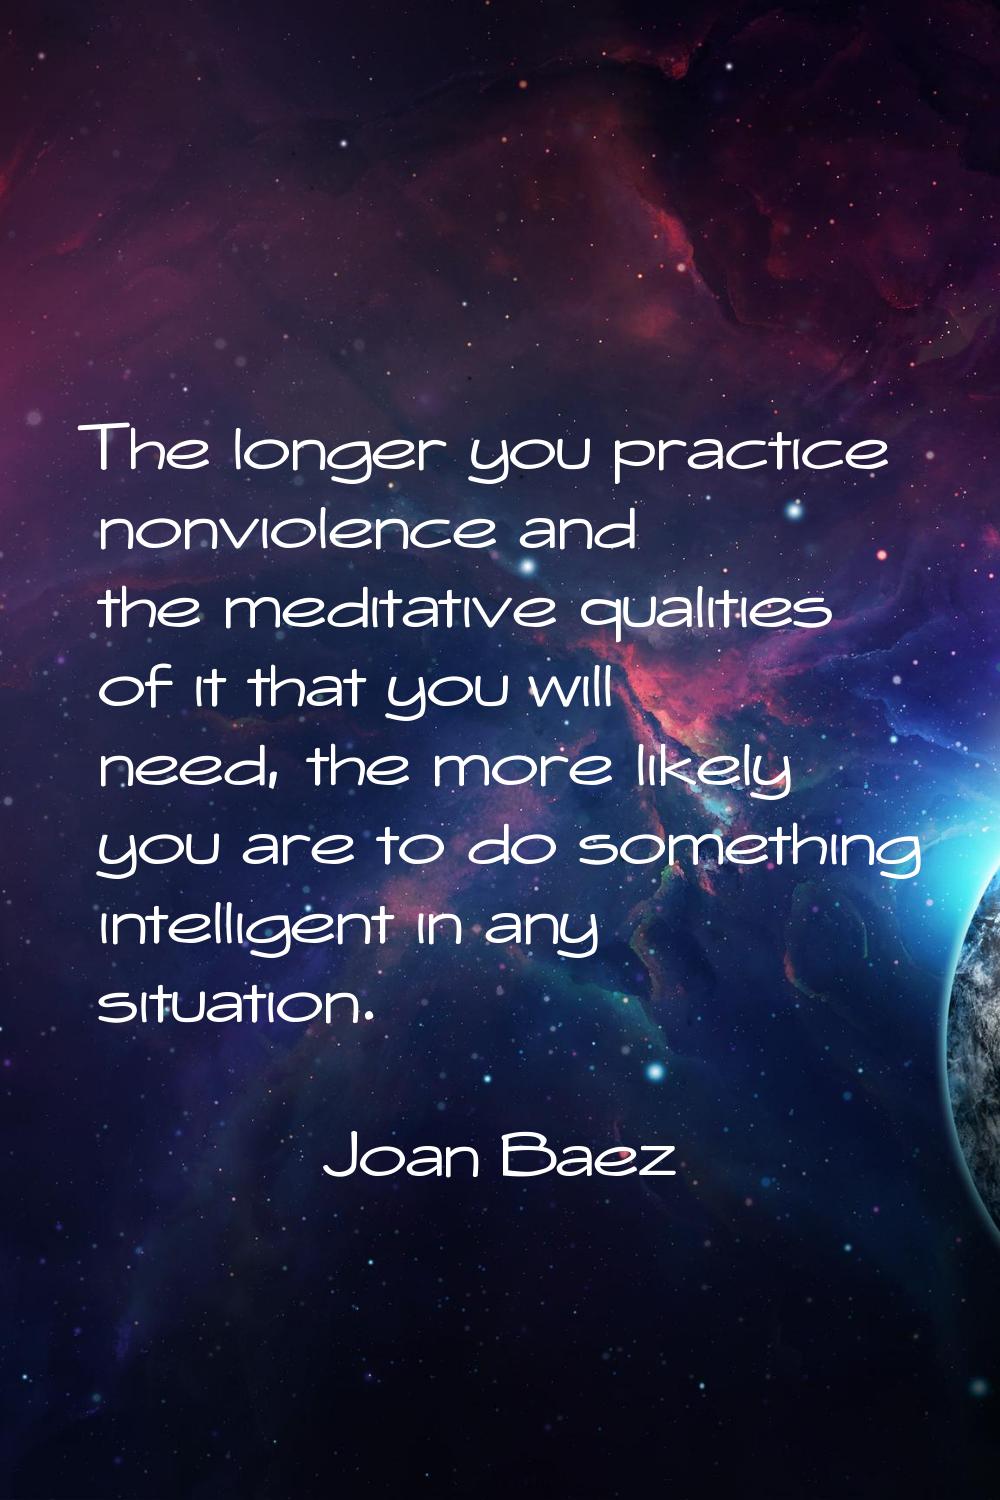 The longer you practice nonviolence and the meditative qualities of it that you will need, the more